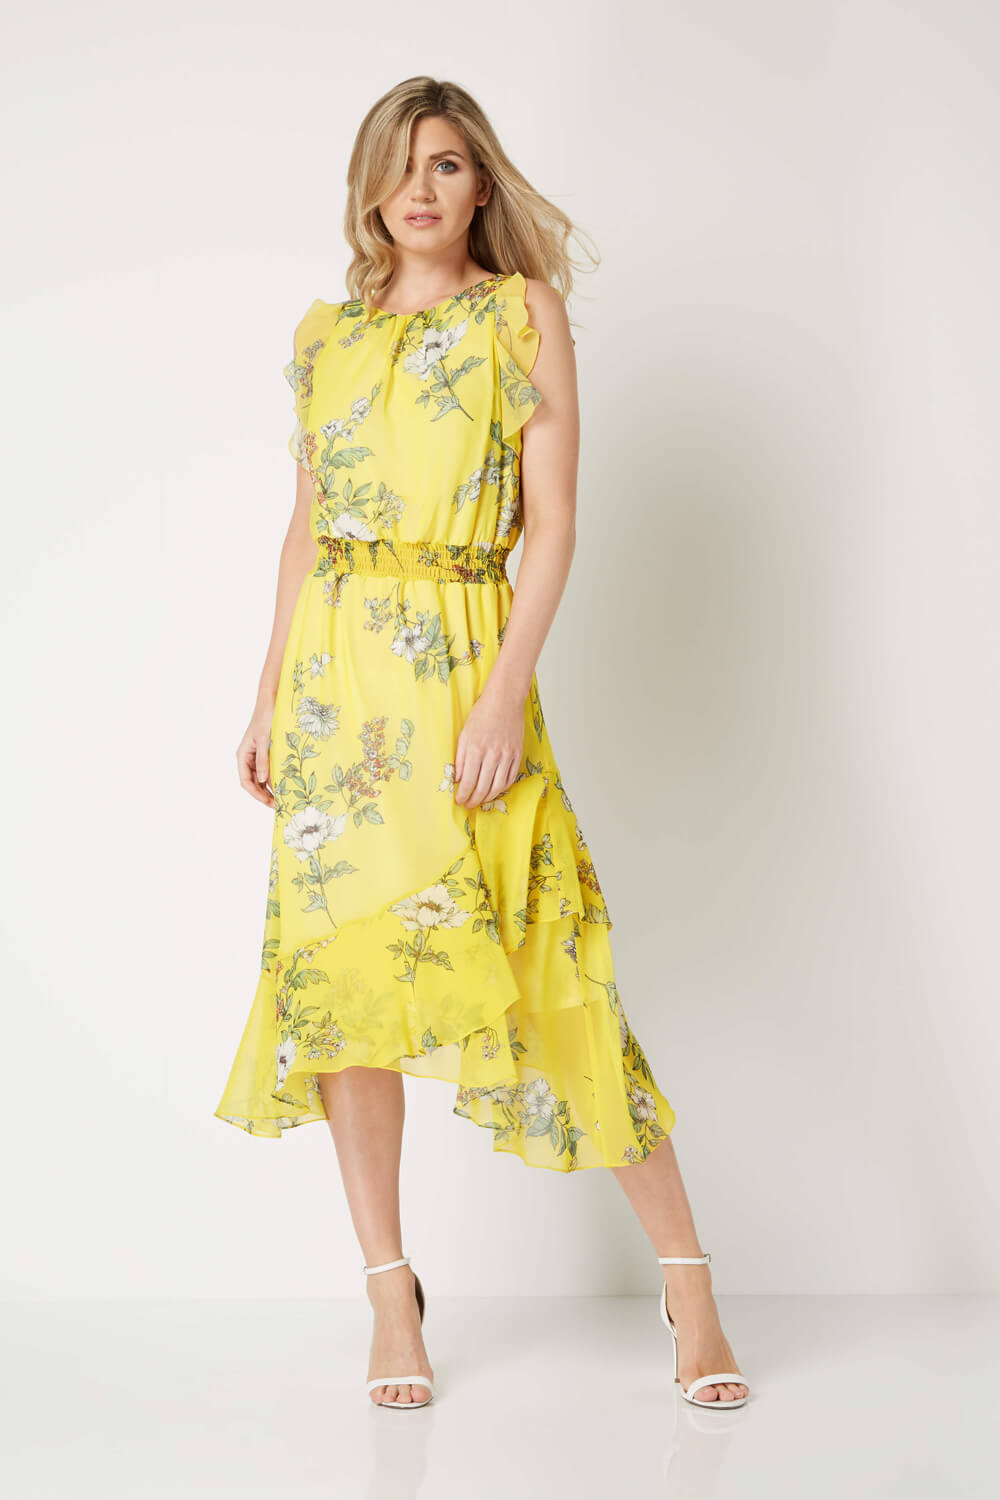 Yellow Floral Frill Midi Dress, Image 2 of 5